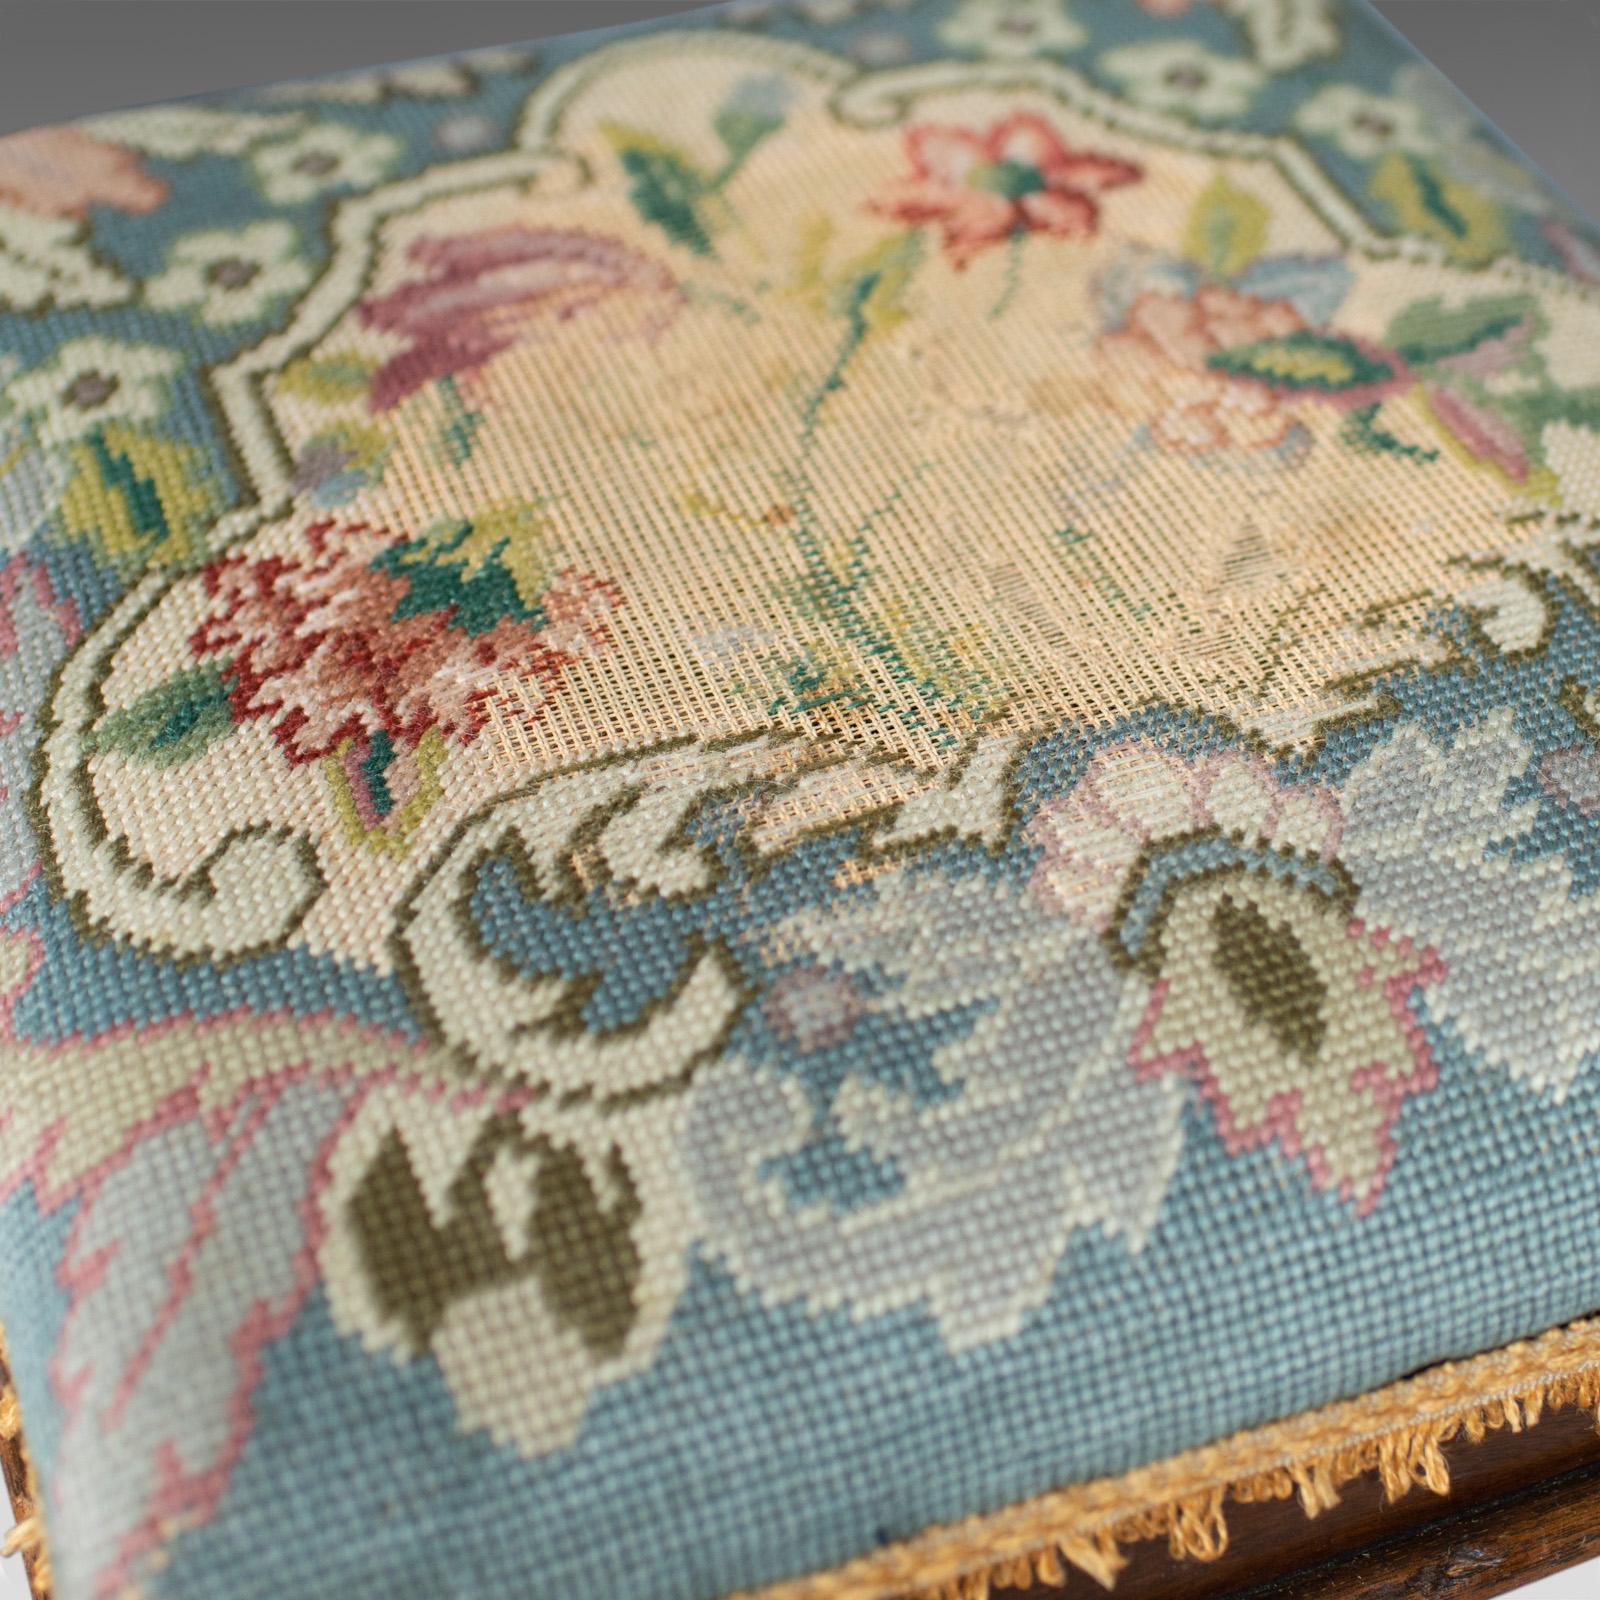 19th Century Square Antique Footstool, English, Victorian, Needlepoint, Carriage, circa 1890